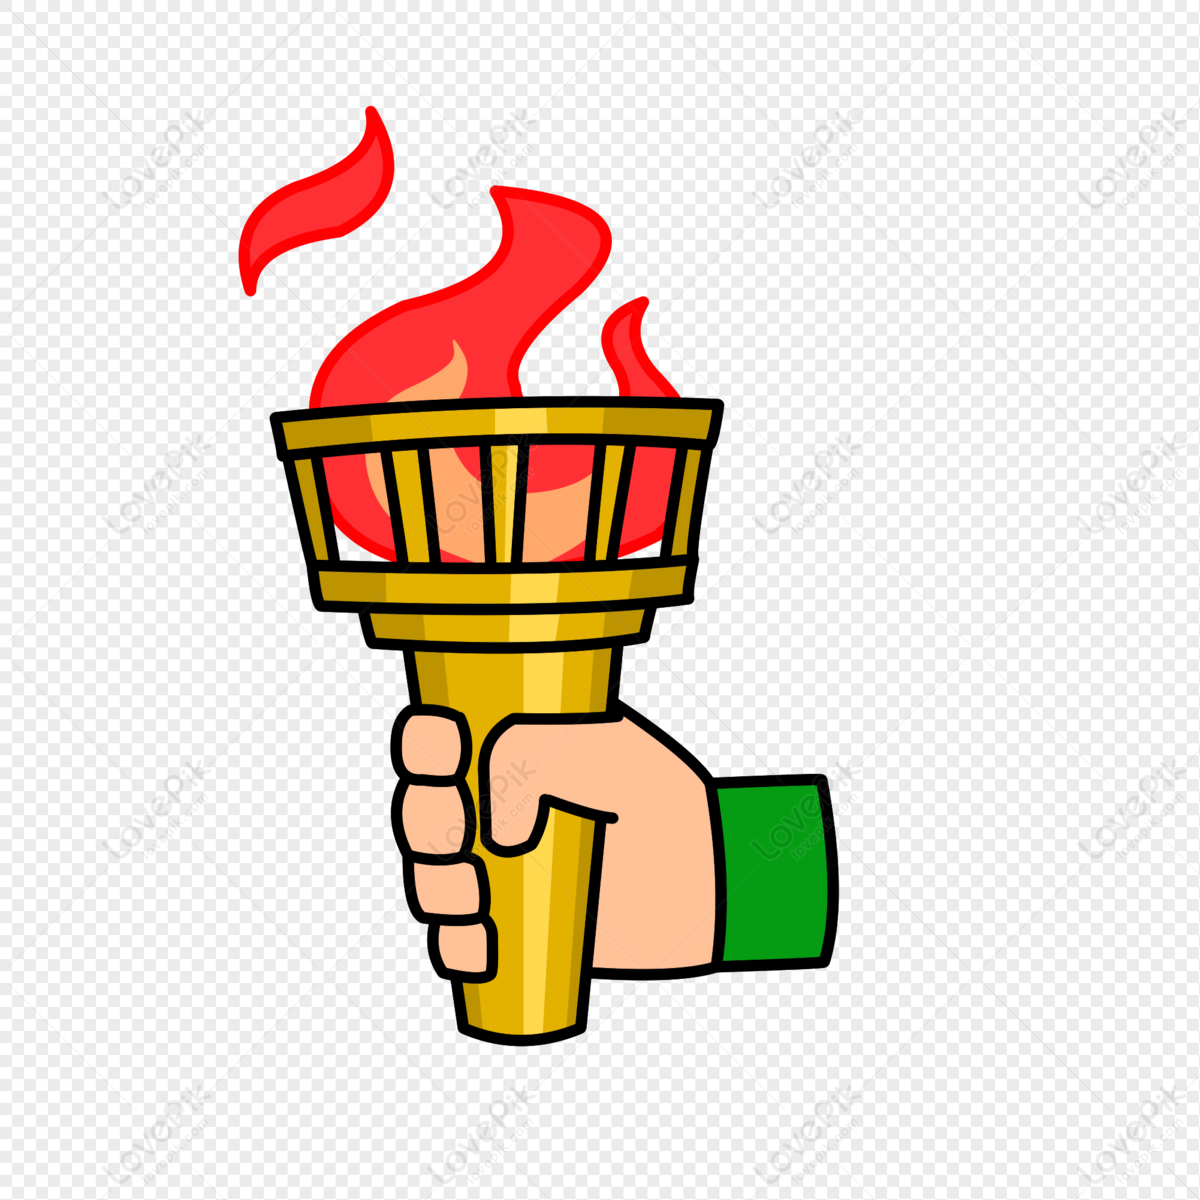 Fire Torch PNGs for Free Download